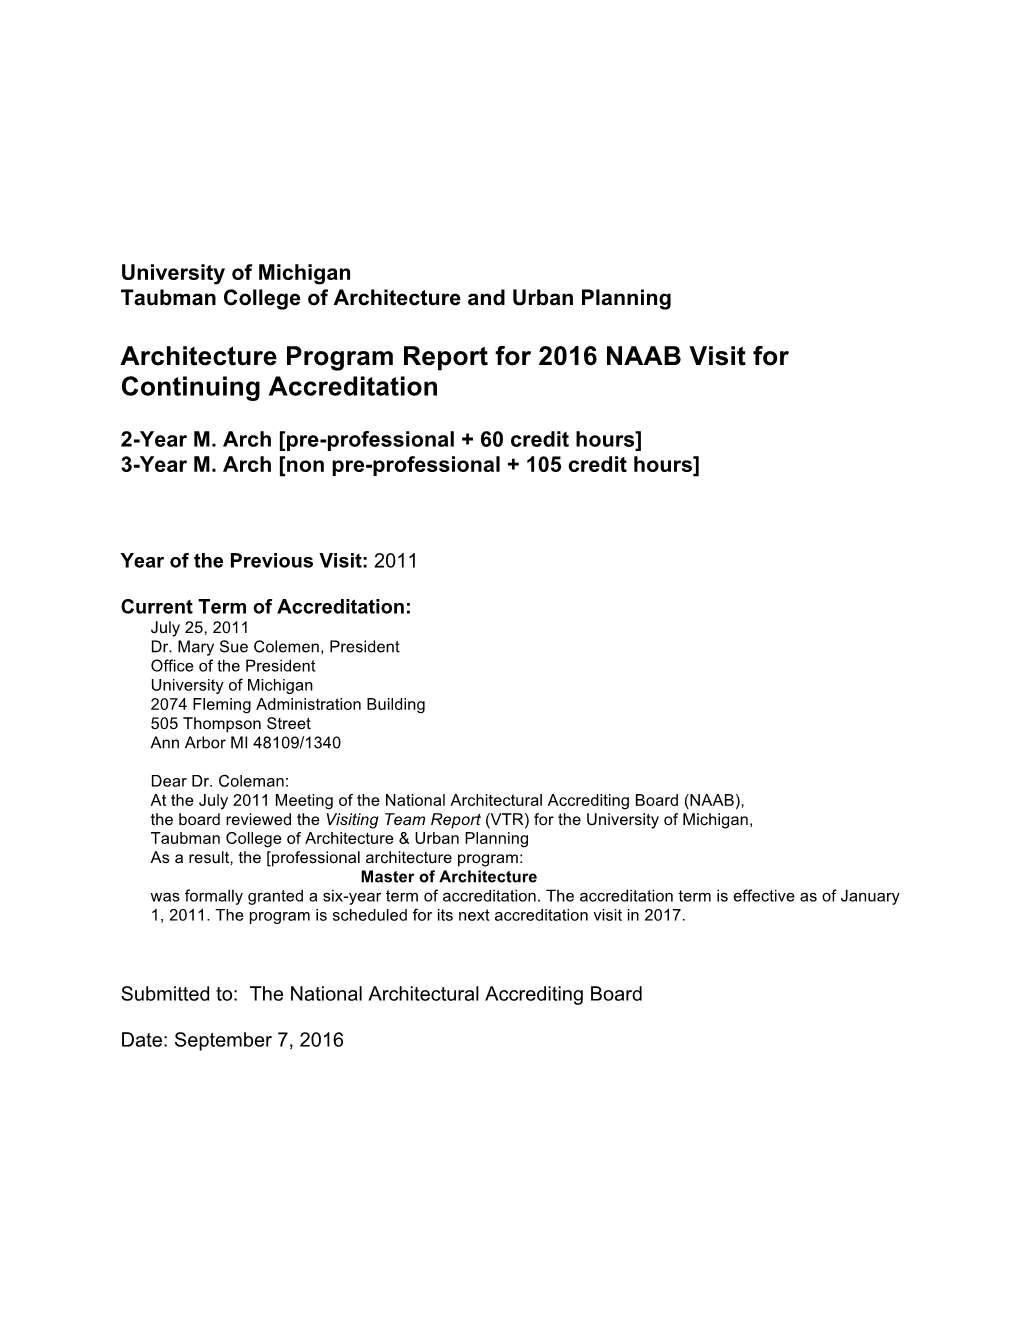 Architecture Program Report for 2016 NAAB Visit for Continuing Accreditation